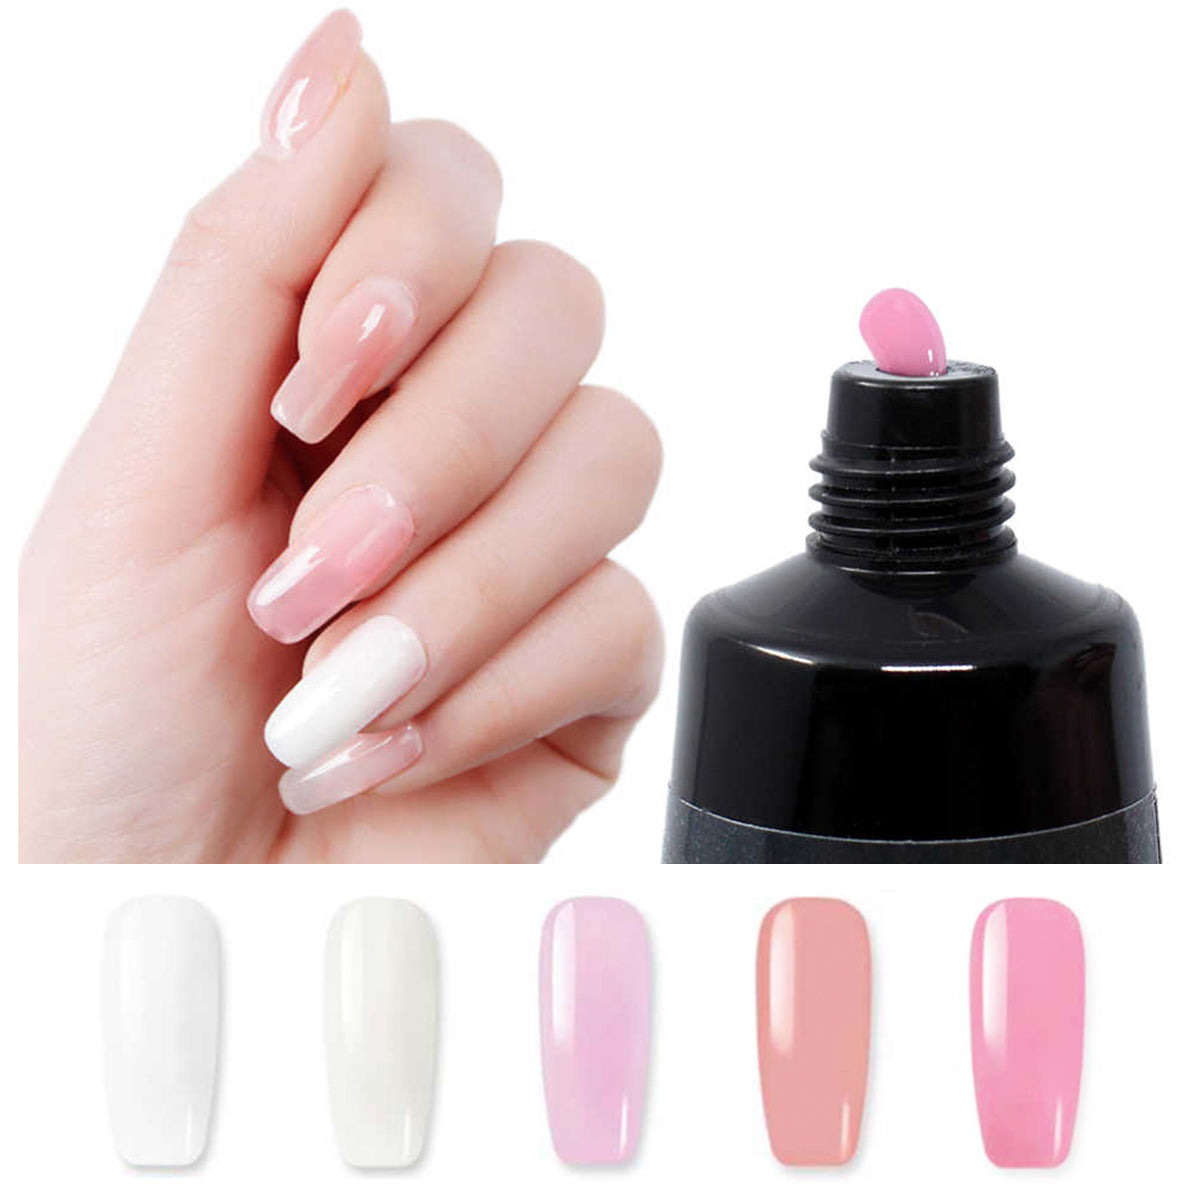 Diy Acrylic Nails Kit - Make sure you read the ingredients so the ...